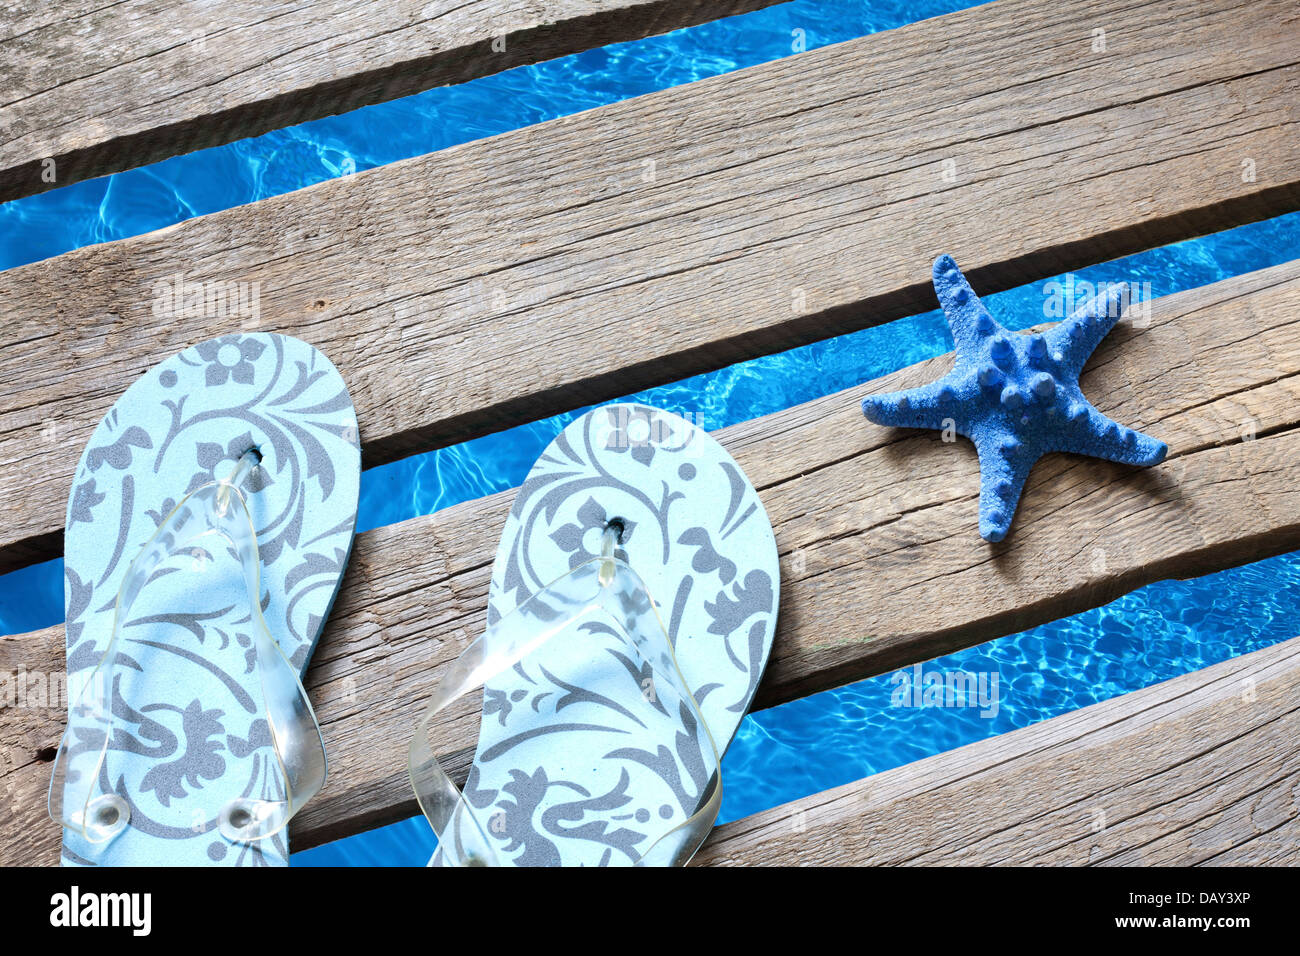 Beachwear on the pier at sea holiday vacation background concept Stock Photo